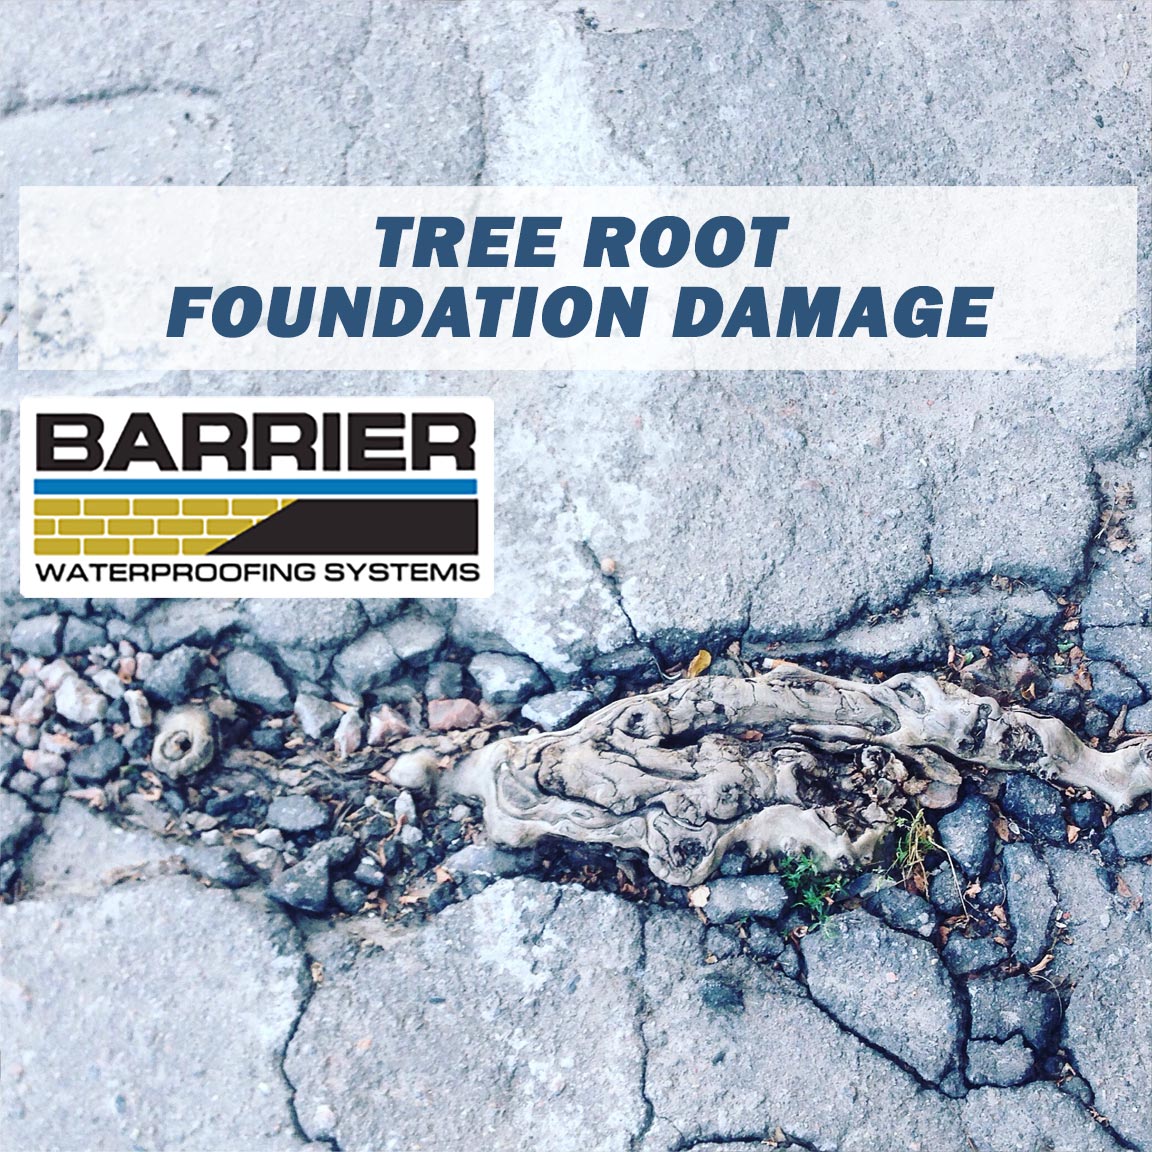 Photo of tree roots breaking concrete to depict tree root foundation damage